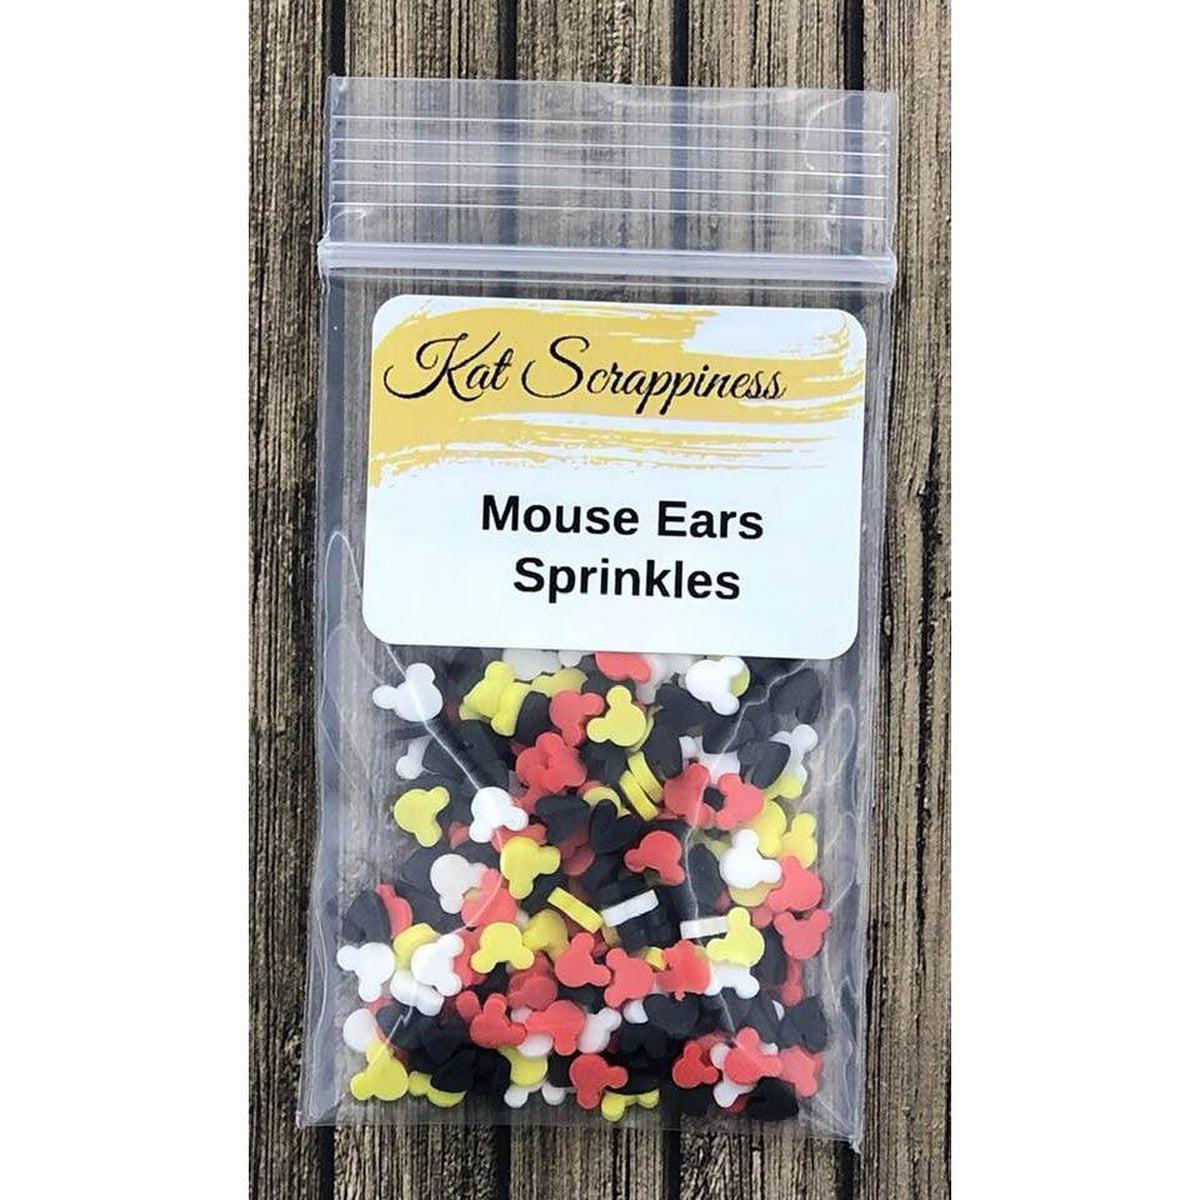 Mouse Ears Sprinkles by Kat Scrappiness - Kat Scrappiness